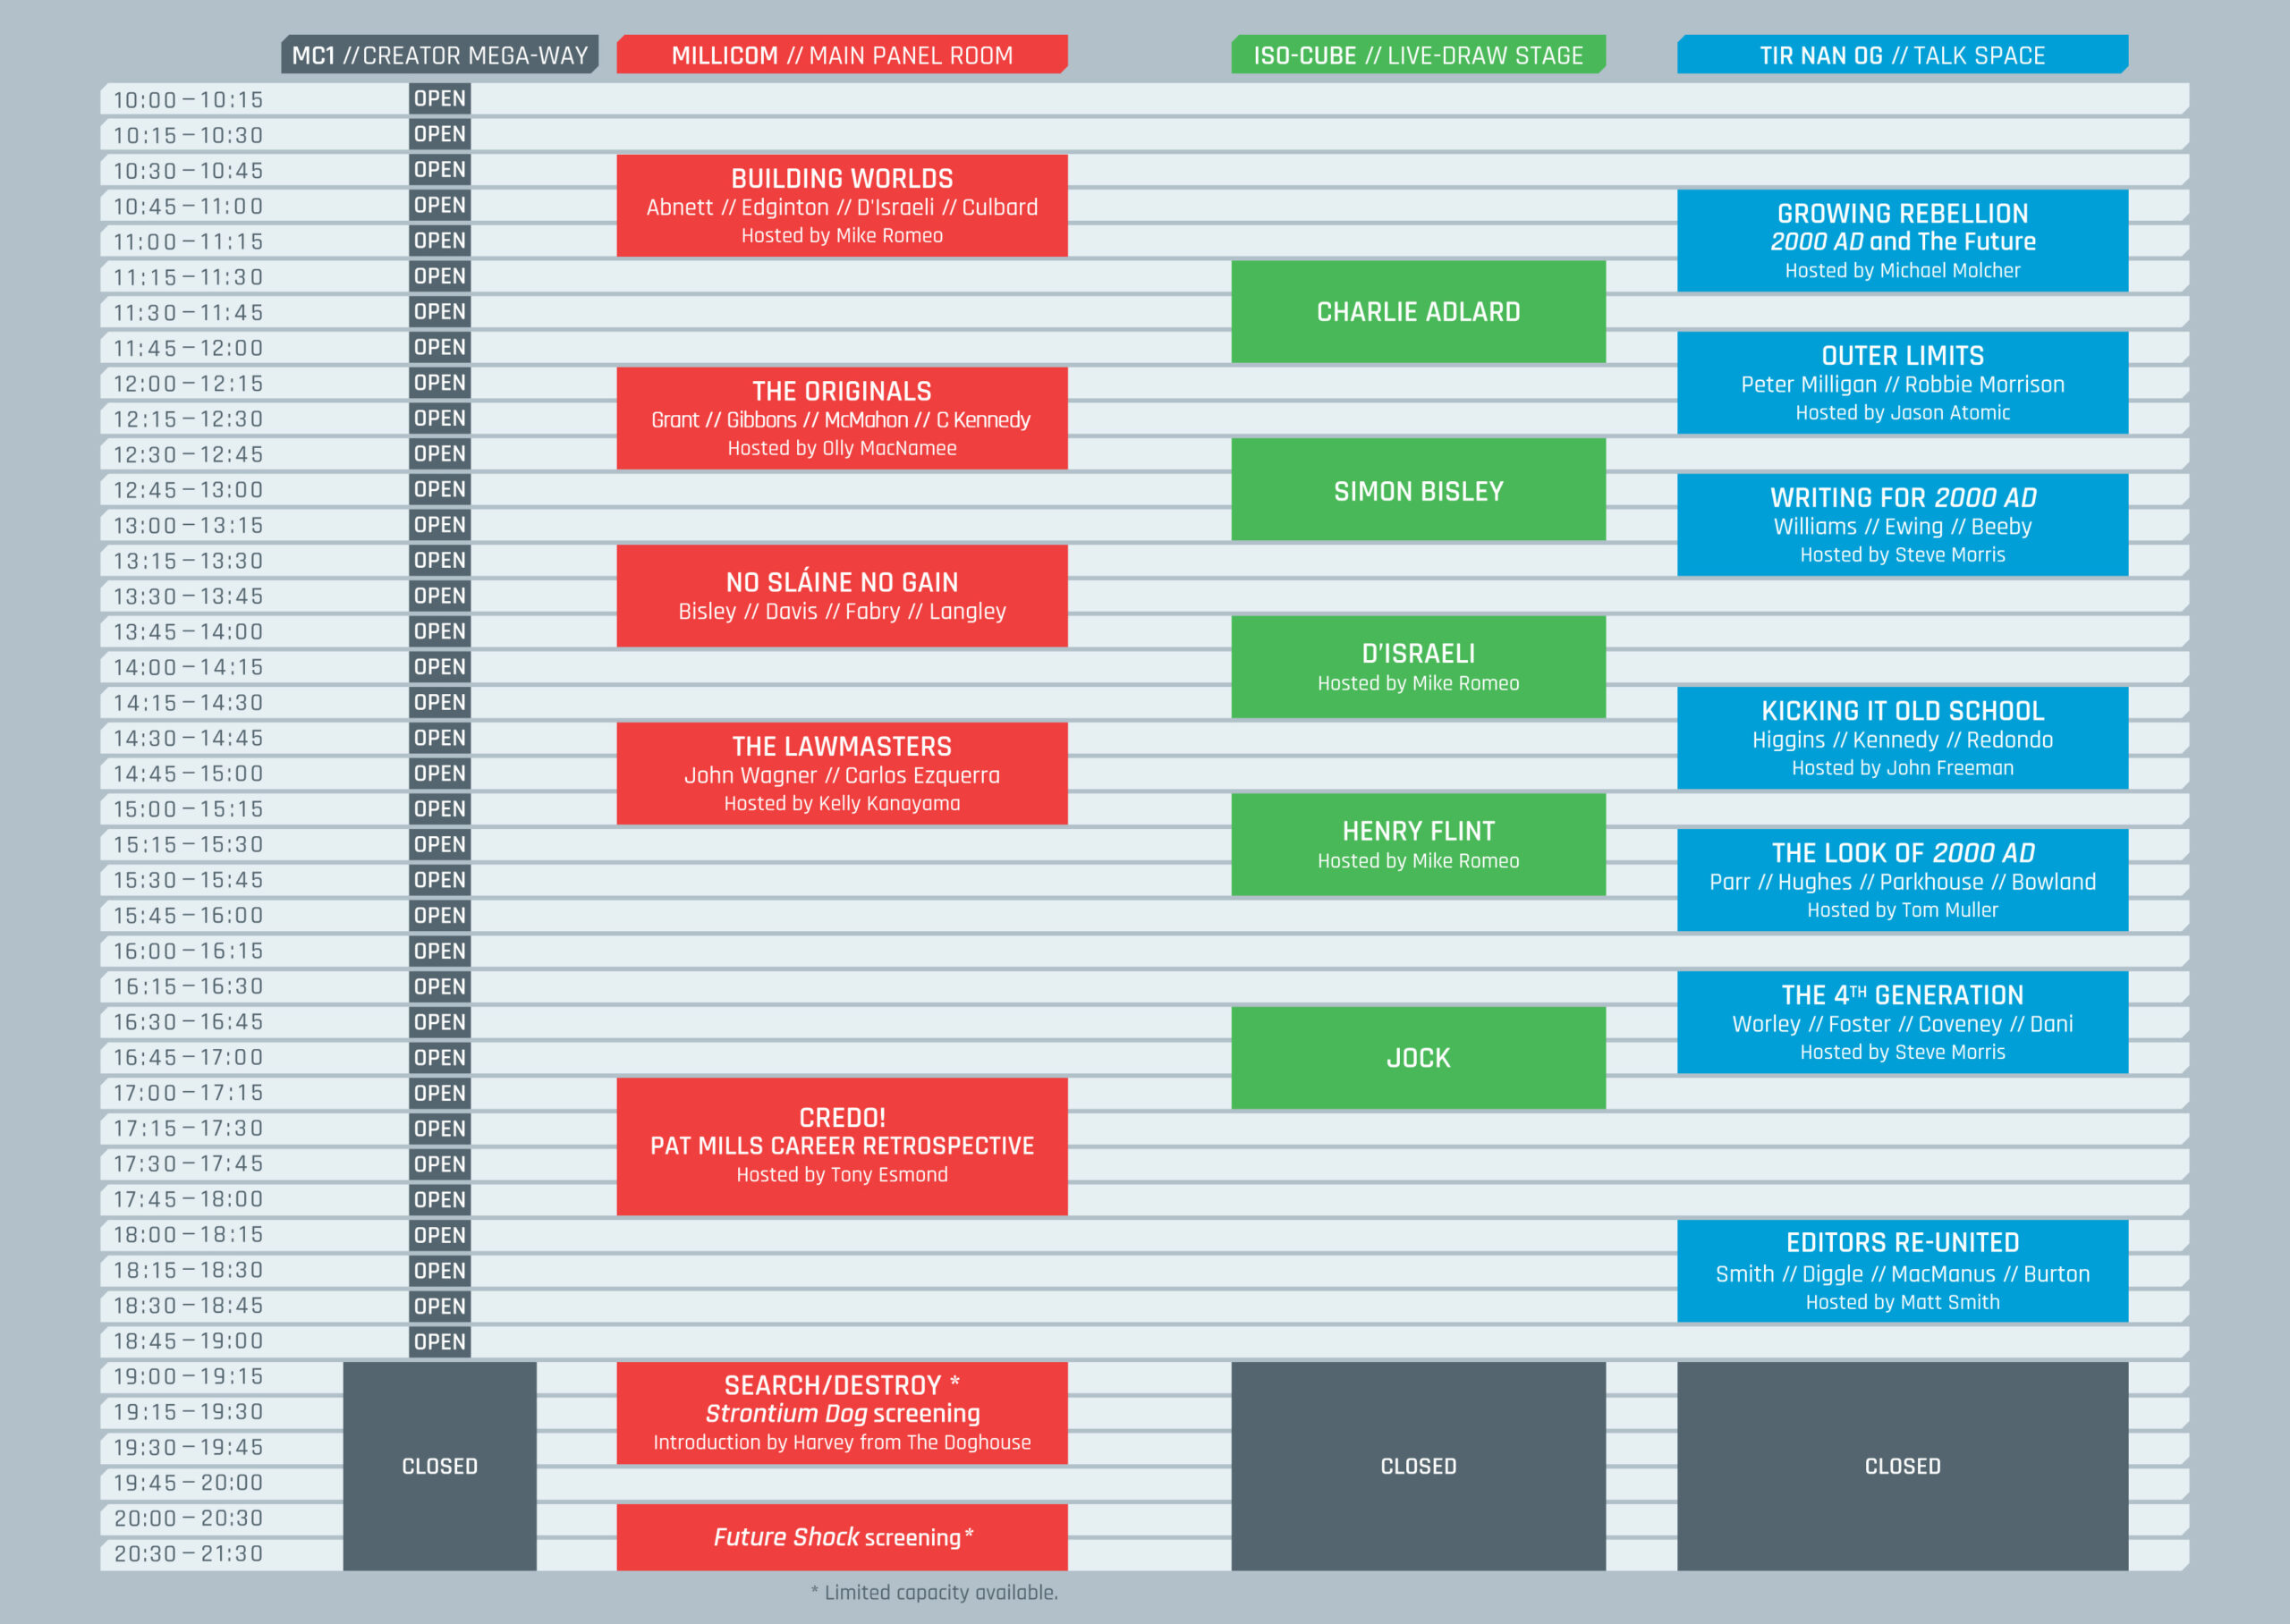 40 Years of Thrill-power: floor plan and updated schedule revealed!